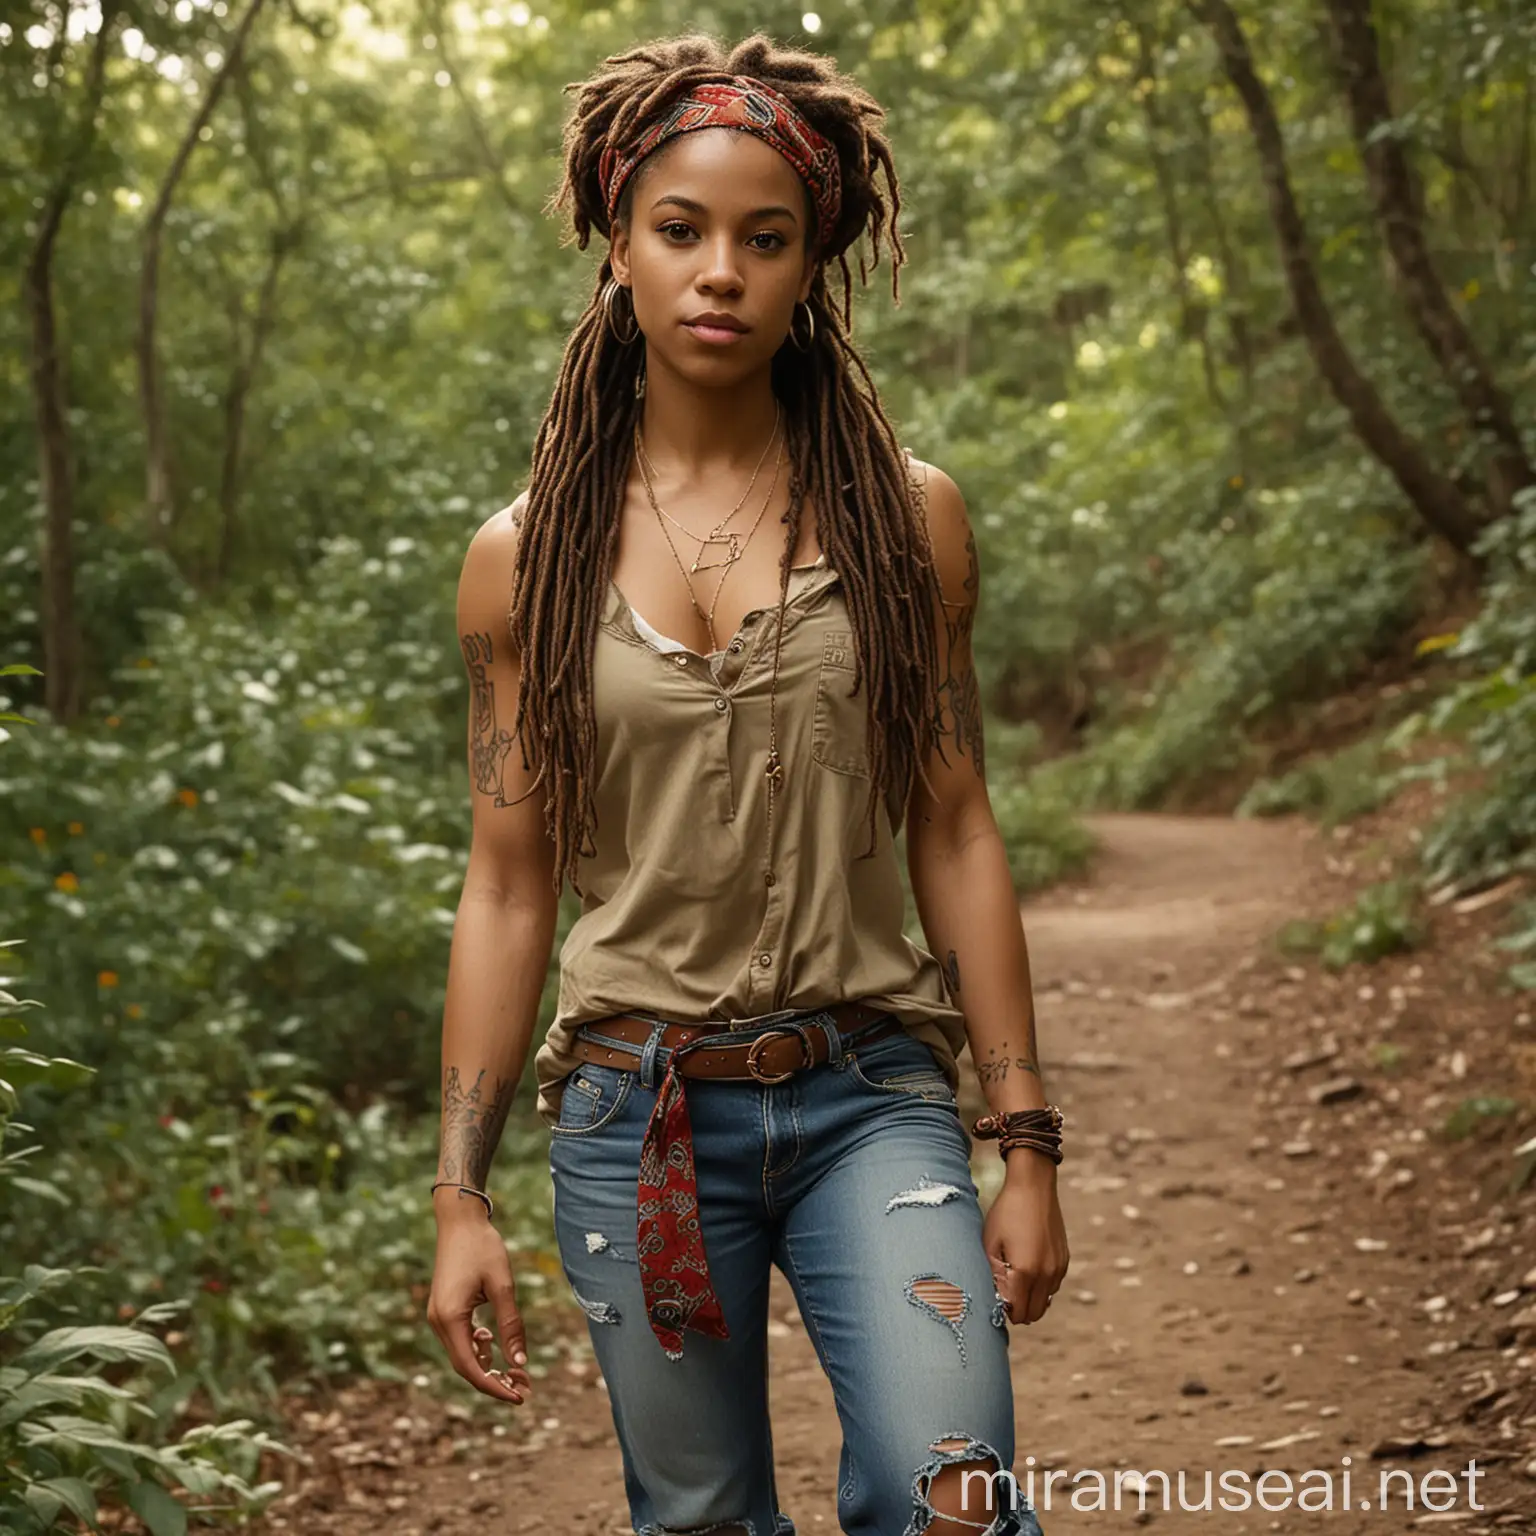 A 29-year-old black woman. She had long dreadlock brown hair, with a scarlet satin paisley flowers print headband. Has a muscular body, dark eyes and tattoos on arms. She wore a khaki tie front sleeveless shirt, denim bermuda with a sheath on her waist, hiking leather boots, and a golden necklace. She carries an determination and distrustful aura.